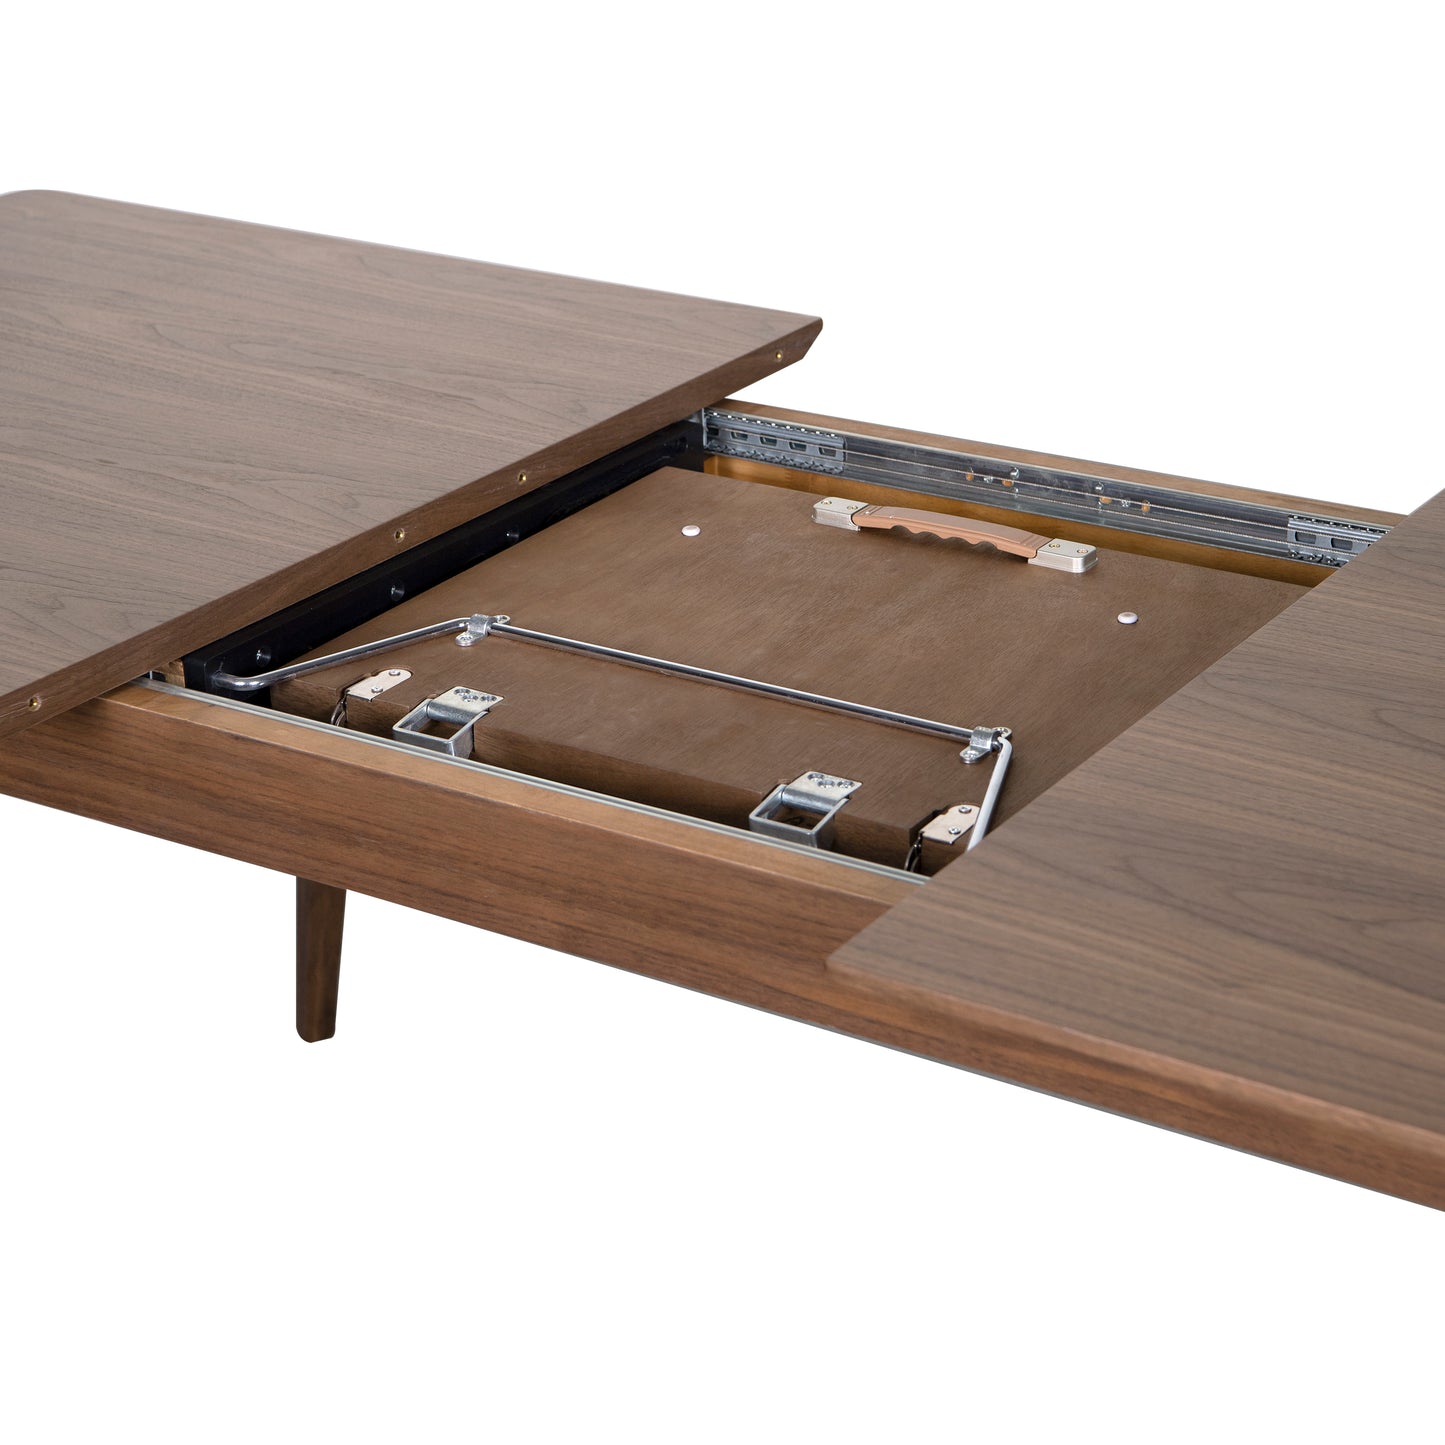 Lawrence Extendable Dining Table